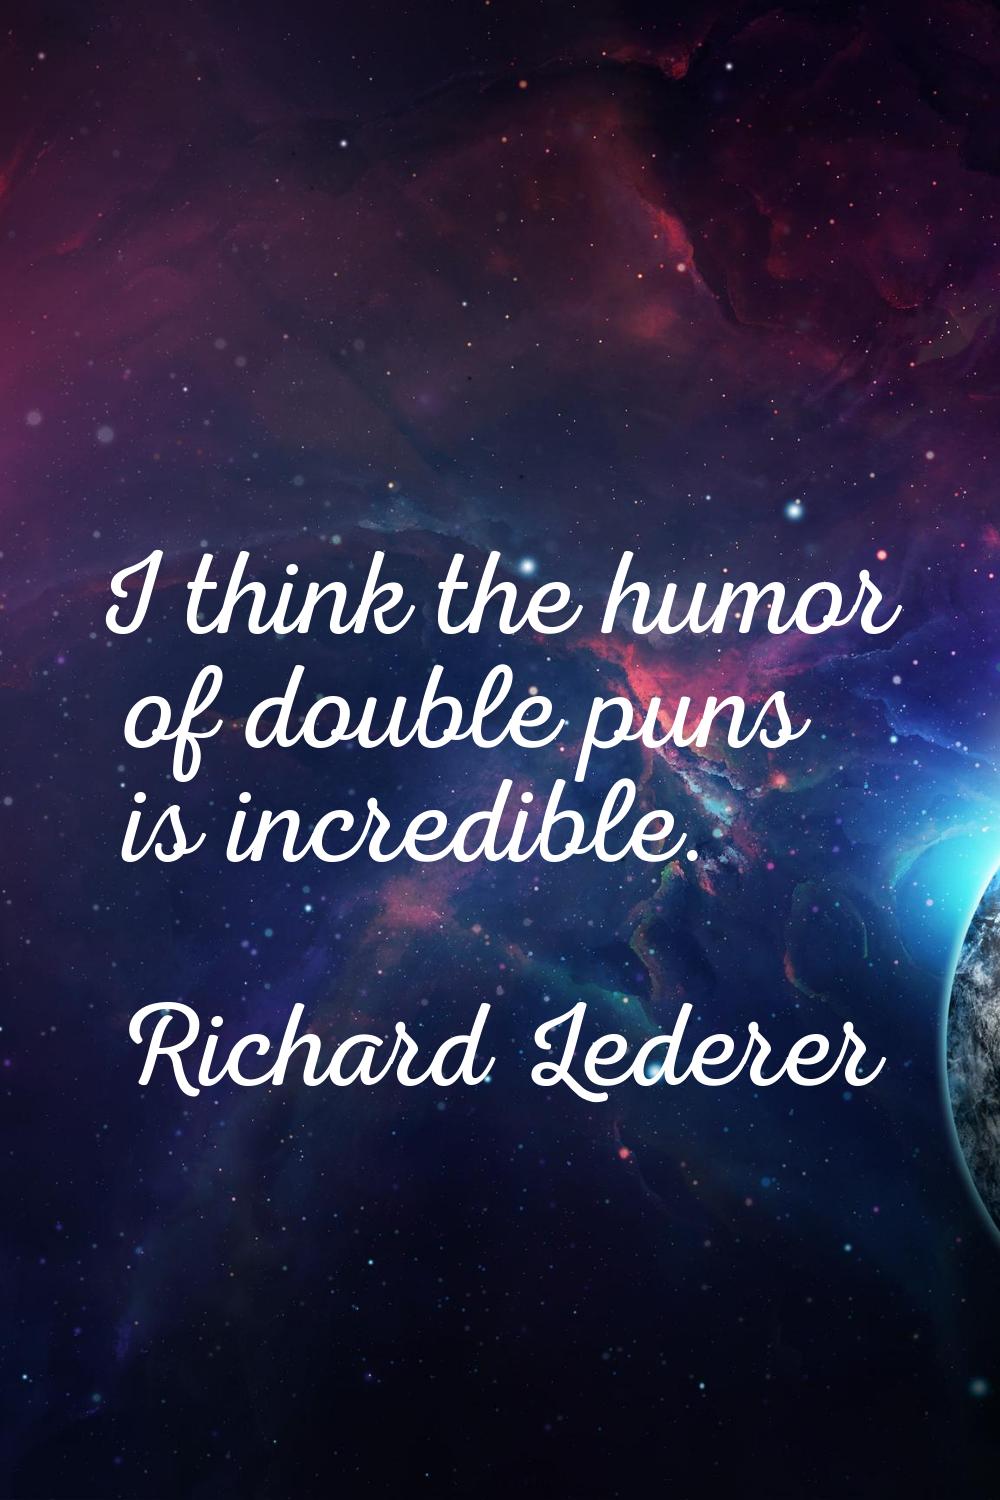 I think the humor of double puns is incredible.